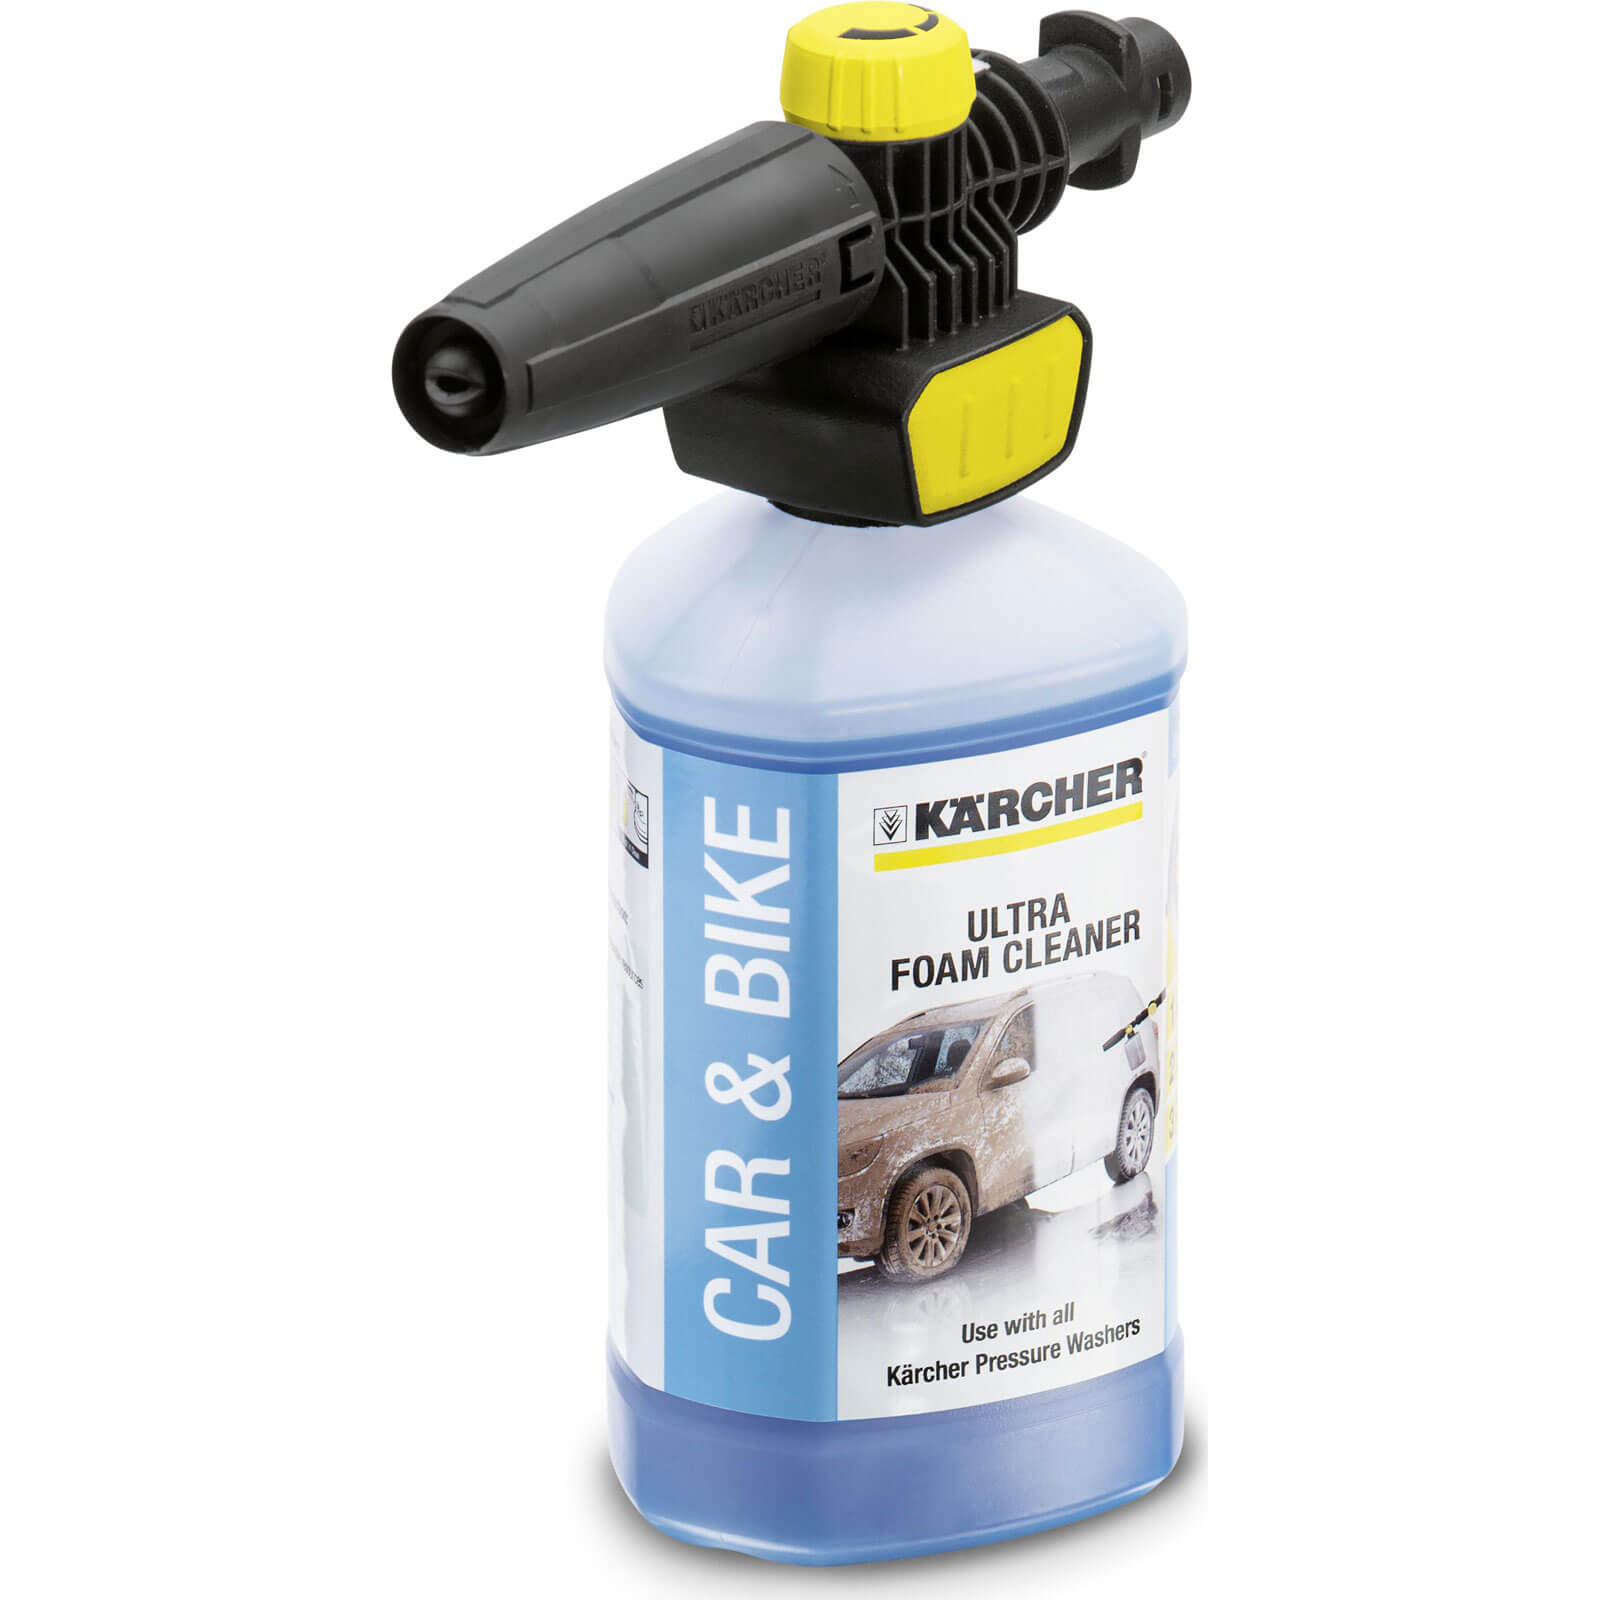 Image of Karcher Plug n Clean Foam Nozzle with Ultra Foam Cleaner for K Pressure Washers 1l